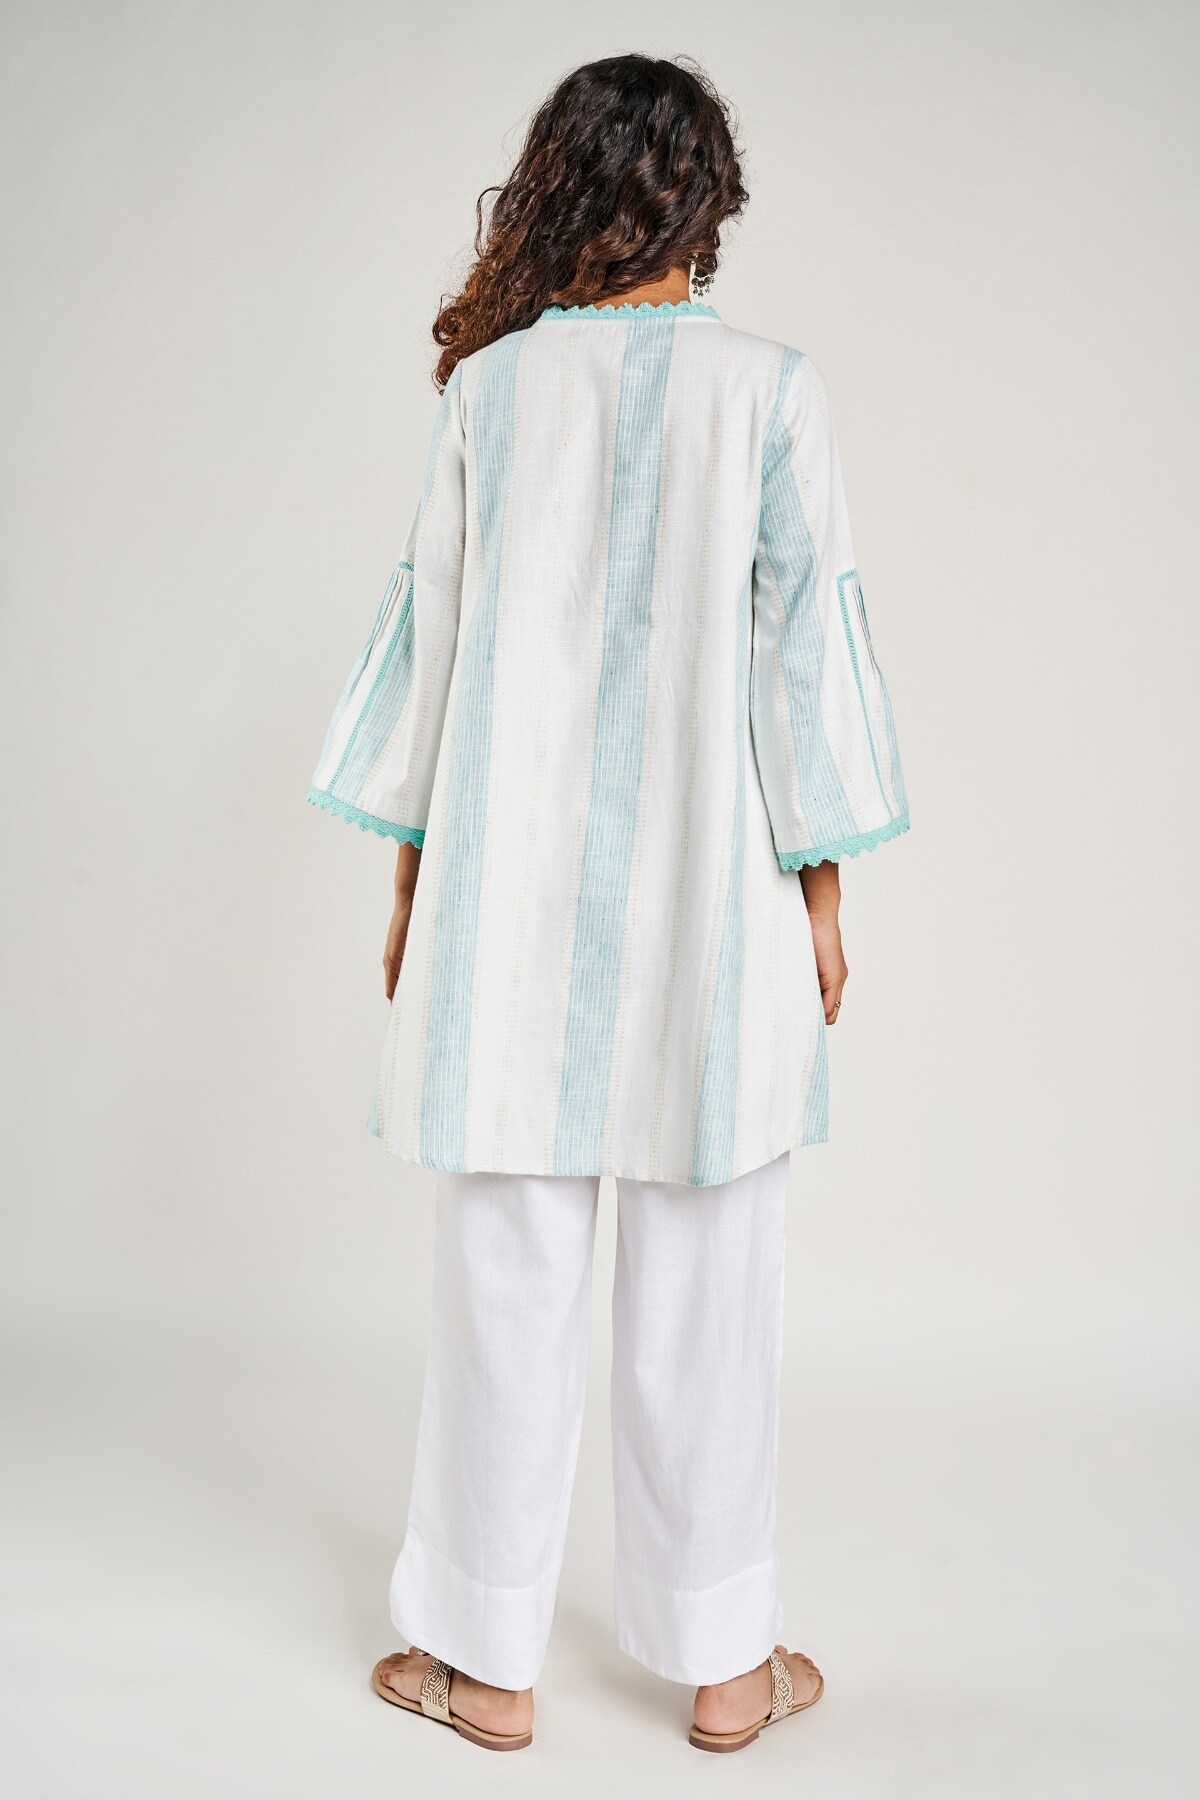 Global Desi | Aqua Striped Embroidered Fit And Flare Dress 6